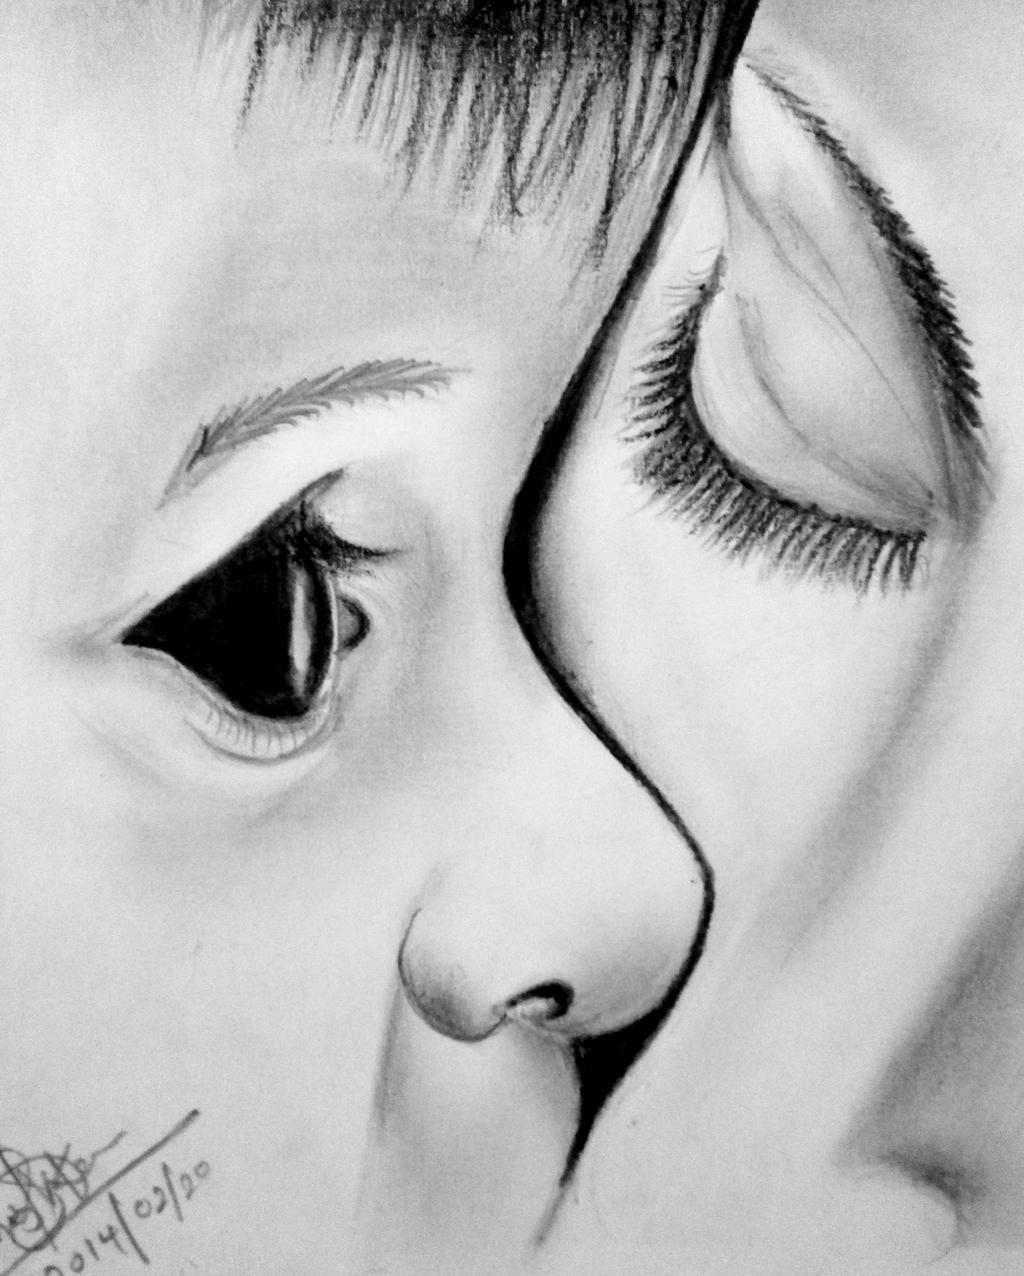 baby and mother love pencil art by Dhanu92TENSHI on DeviantArt